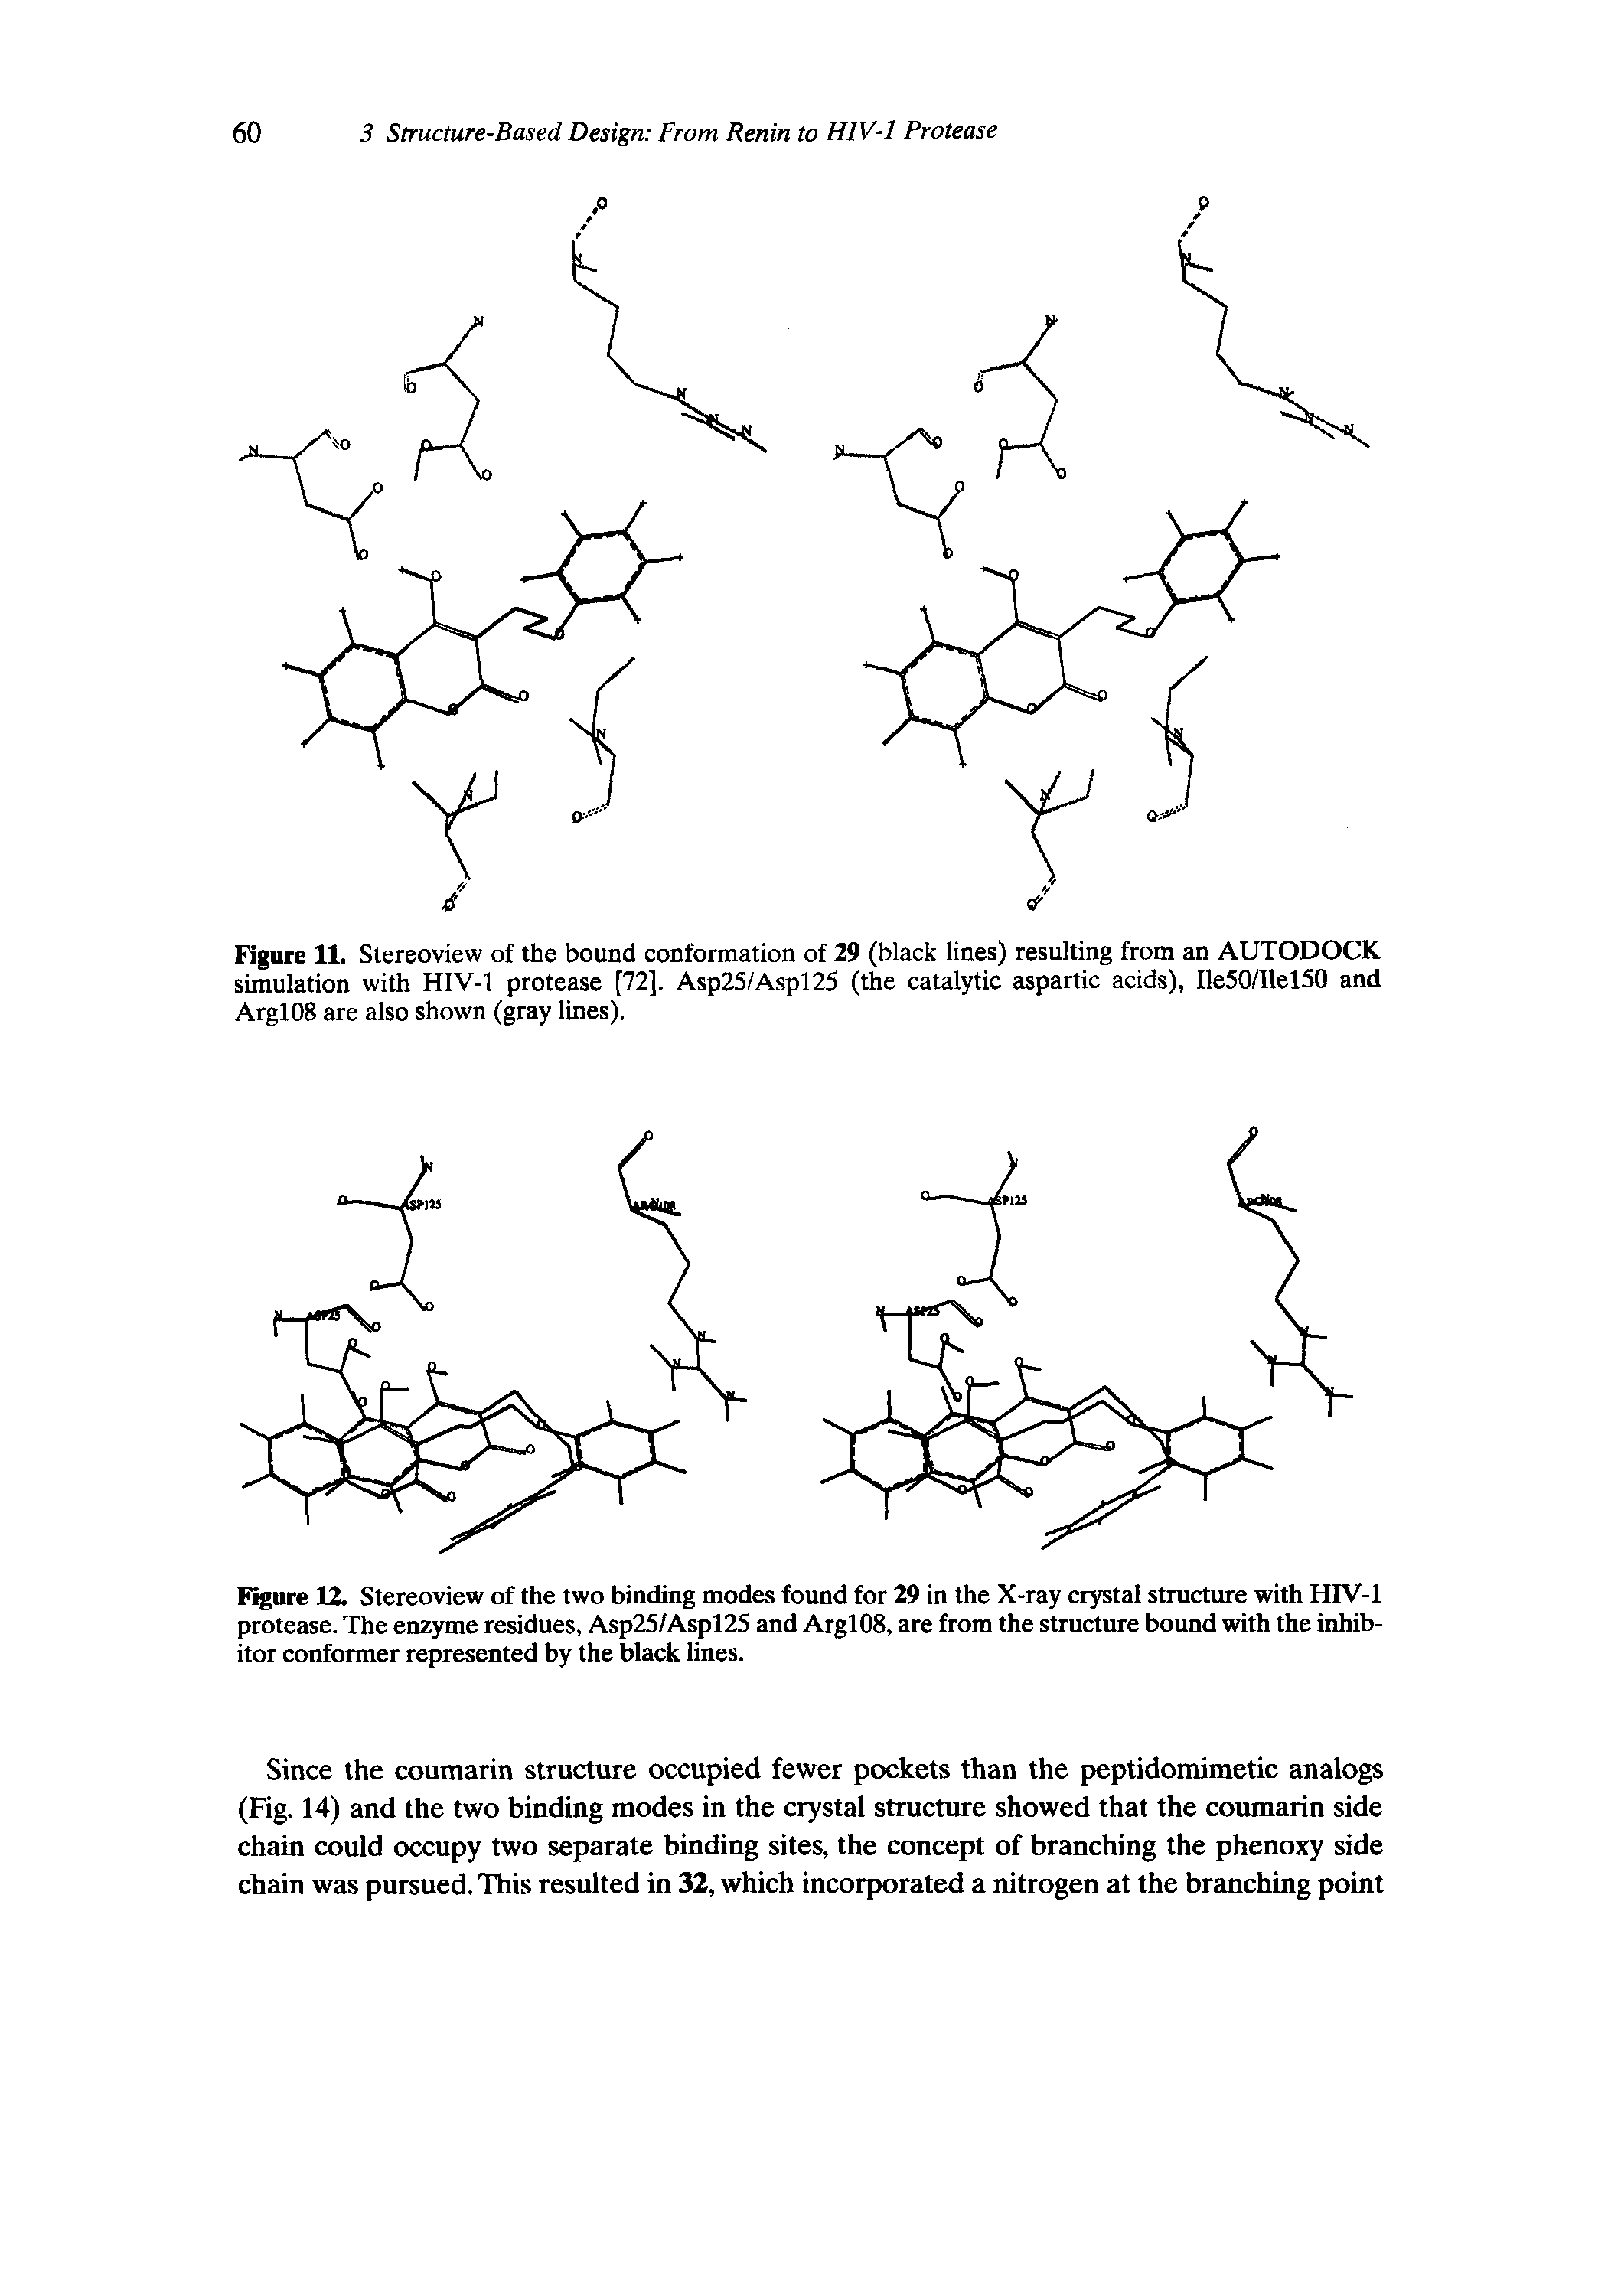 Figure 11. Stereoview of the bound conformation of 29 (black lines) resulting from an AUTODOCK simulation with HIV-1 protease [72], Asp25/Aspl25 (the catalytic aspartic acids), Ile50/Ilel50 and ArglOS are also shown (gray lines).